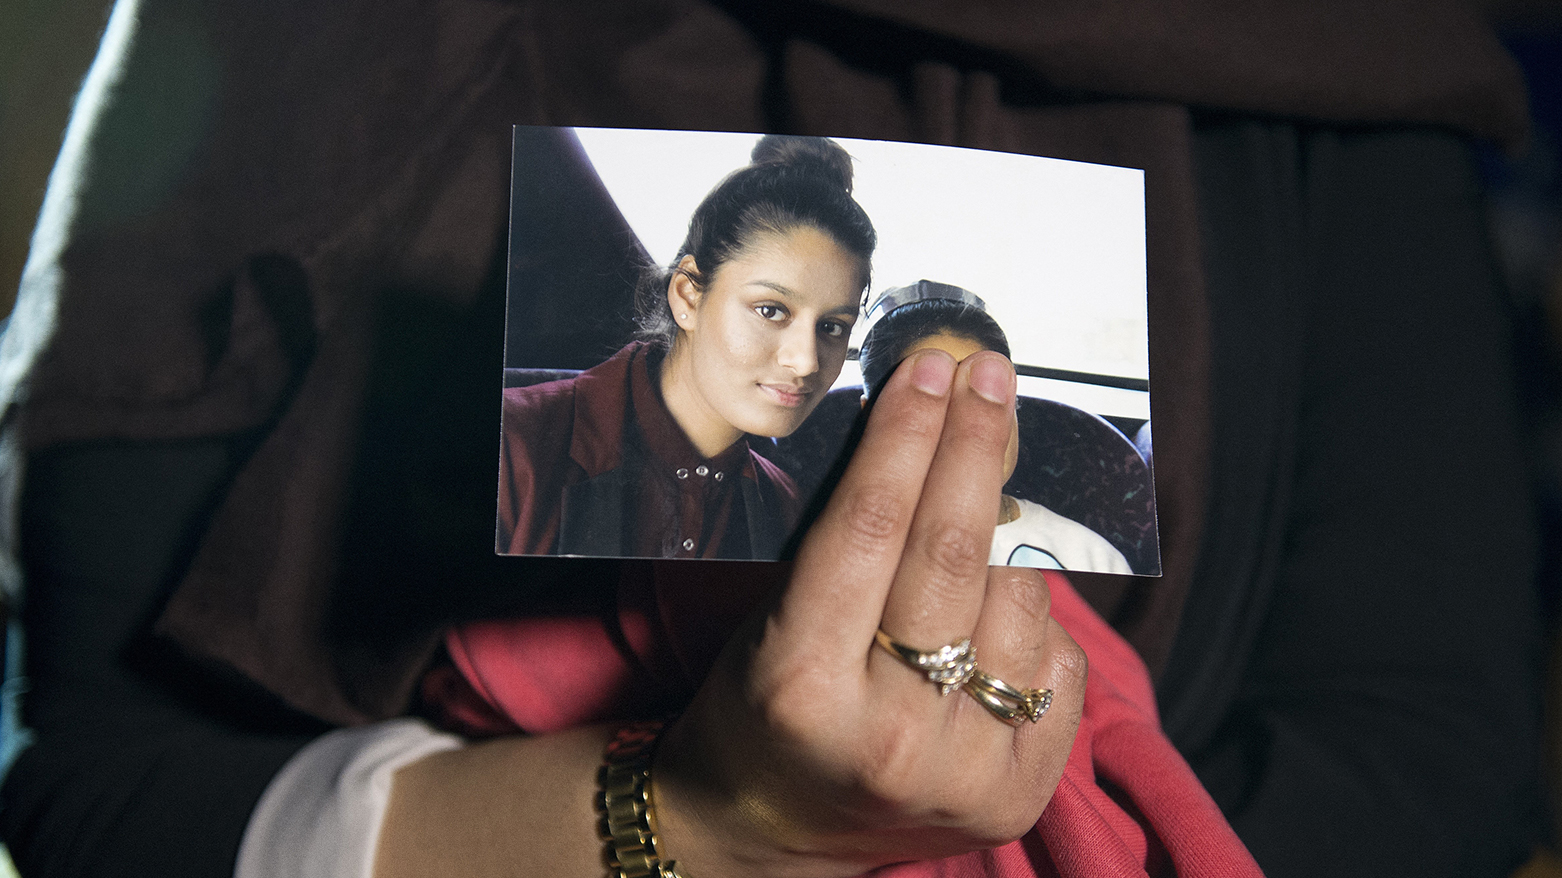 Eldest sister of British girl Shamima Begum, holds a picture of her sister while being interviewed by the media in central London. (Photo: LAURA LEAN/POOL/AFP)